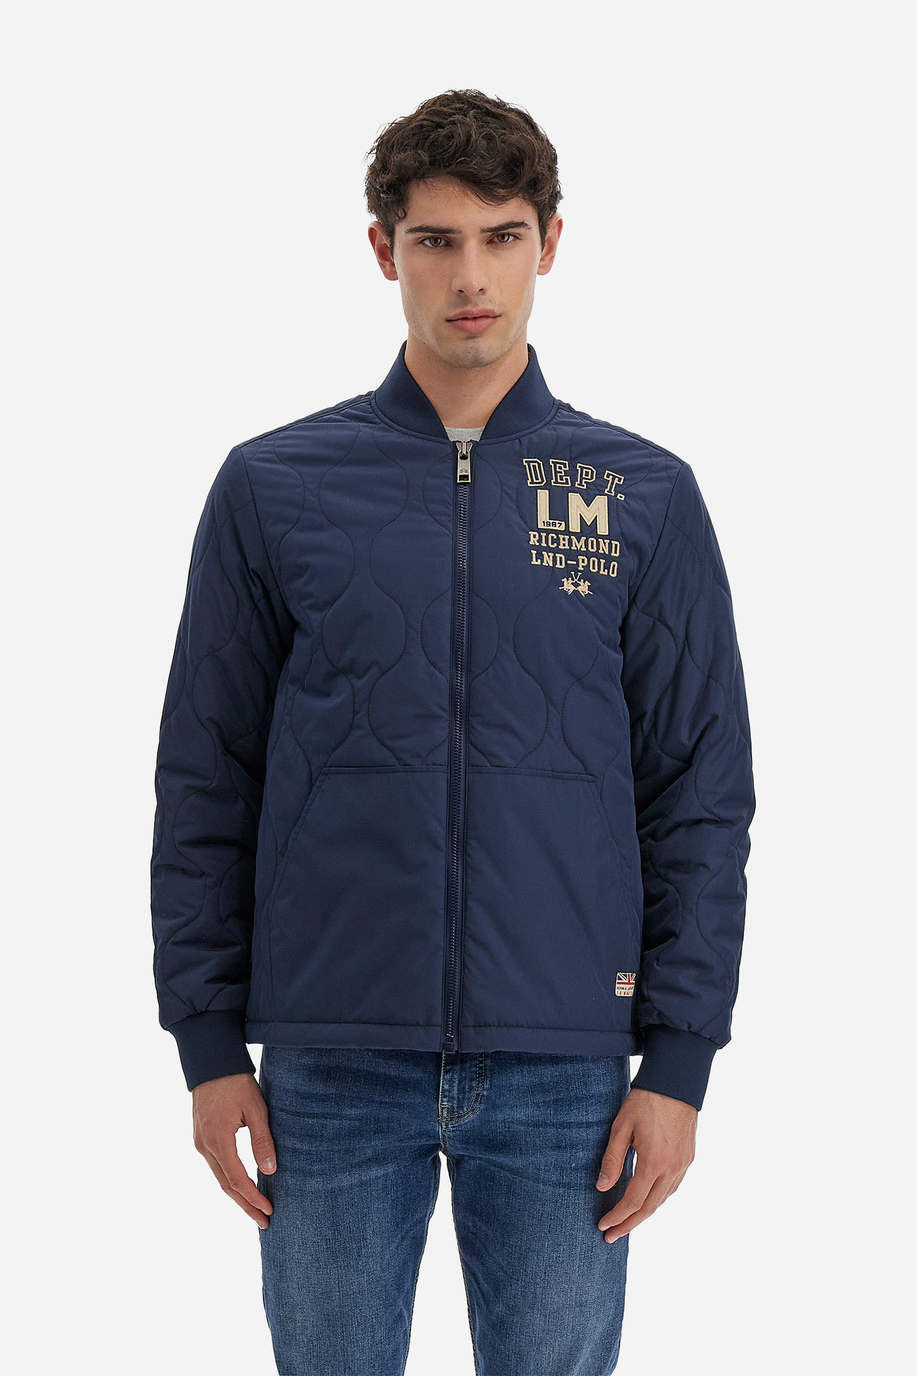 Polo Academy men's solid color high neck full zip jacket with hidden pockets - Vanni - Outerwear | La Martina - Official Online Shop